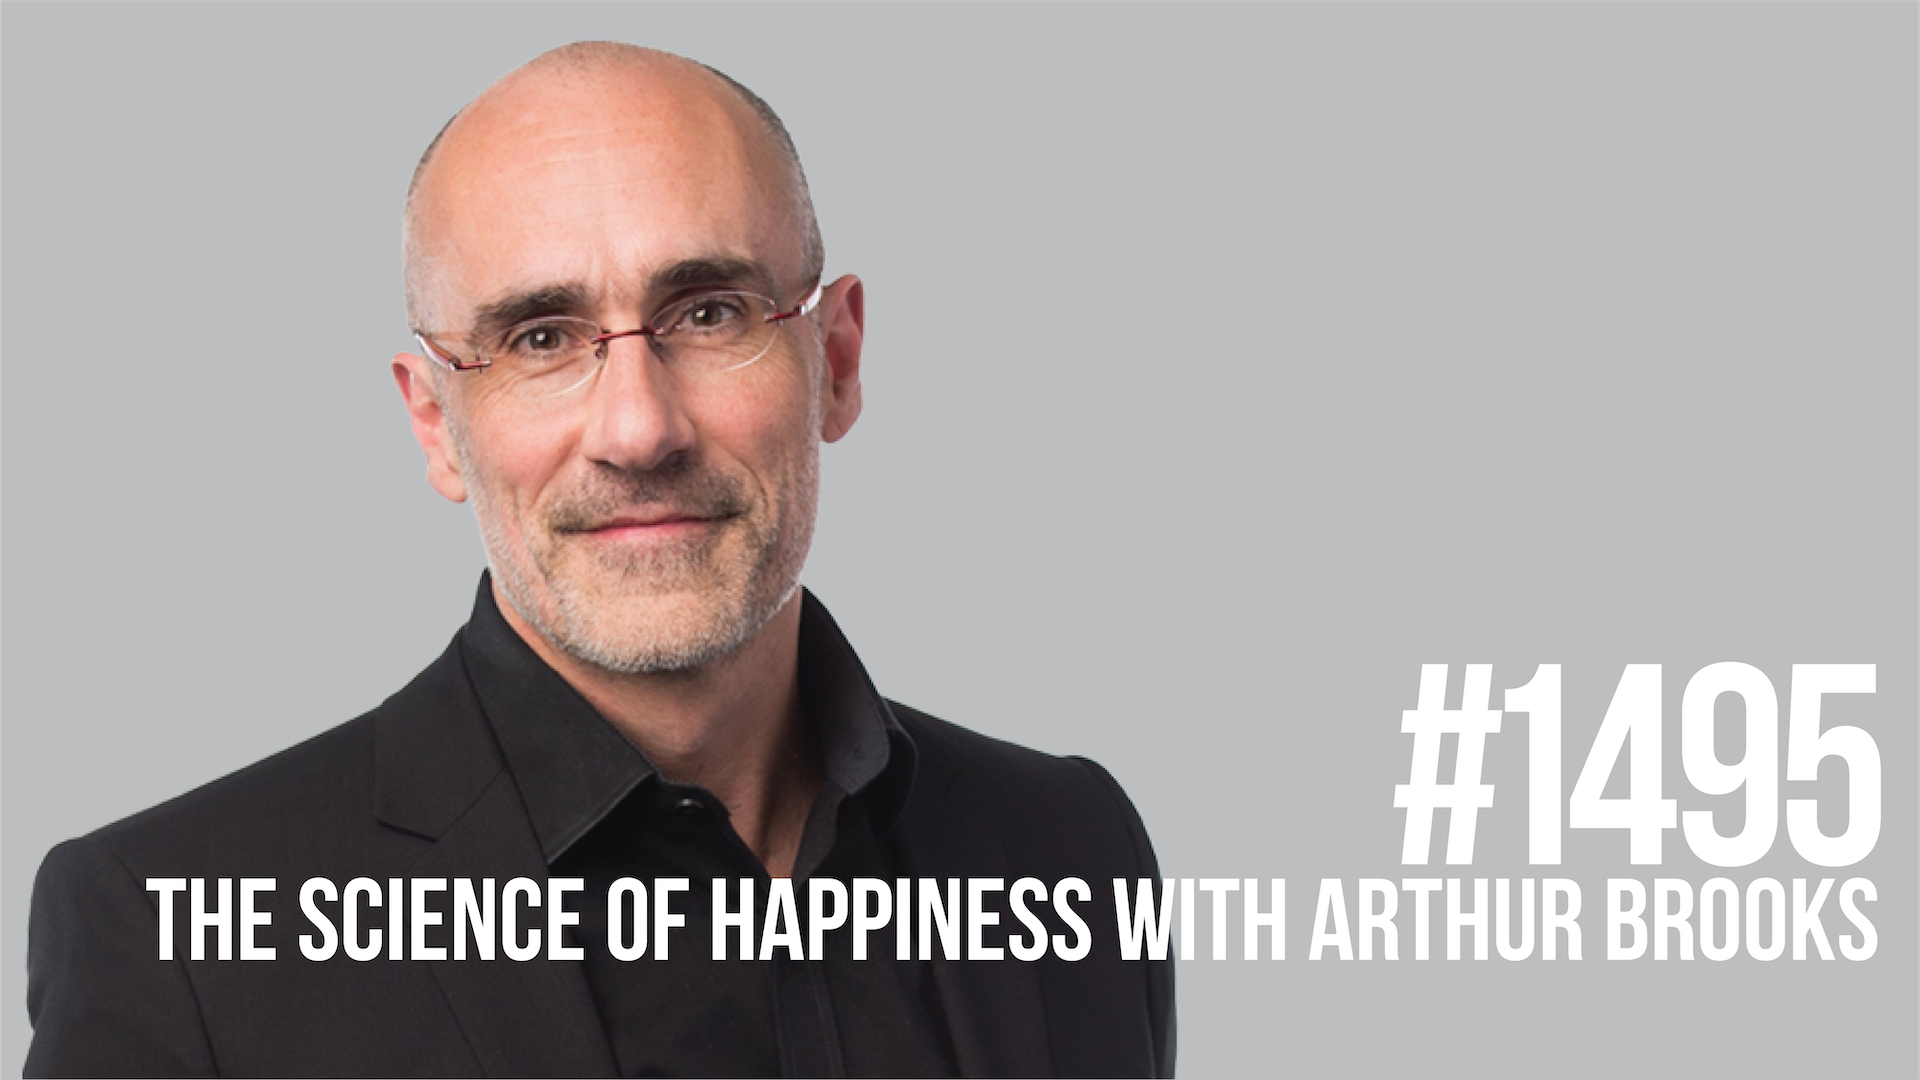 1495 The Science of Happiness With Arthur C. Brooks